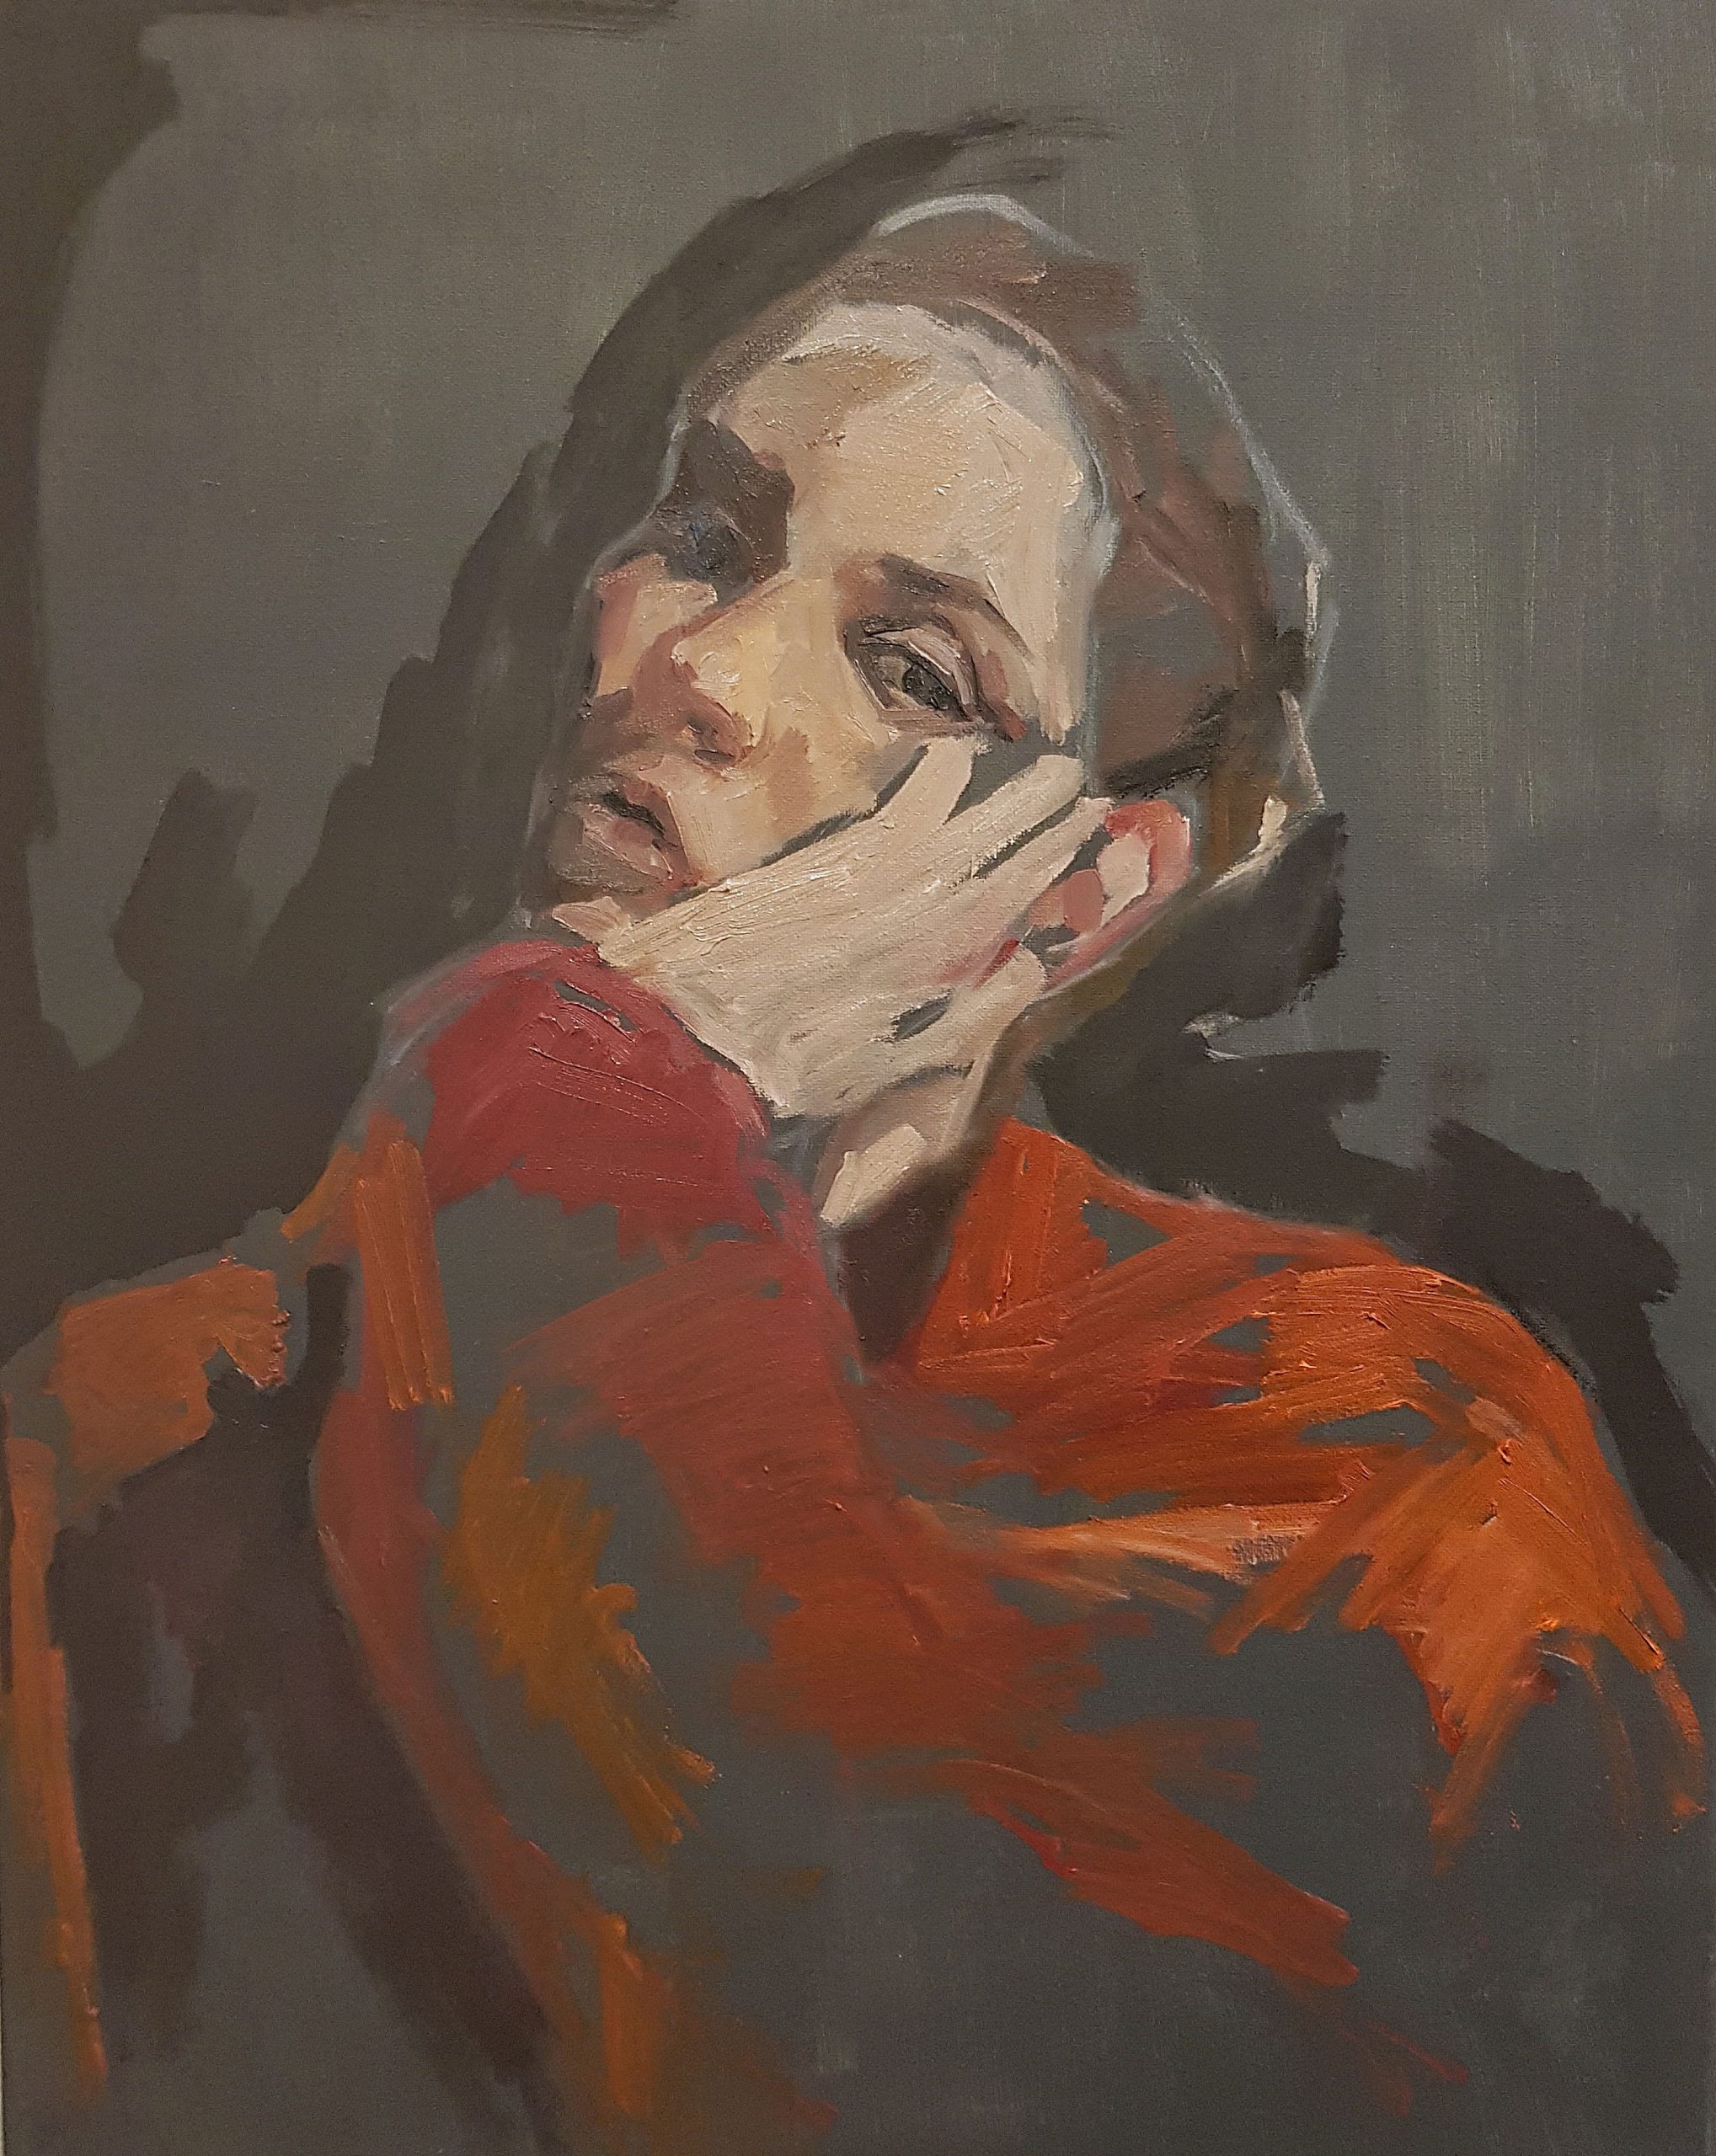 This work is part of the self-portrait series "ALONE. Pandemic Edition". The artist portrays herself in a moment of heaviness and impatience. The openness of the brushstroke and the sketchiness of the image symbolize the transience of the moment, which may feel heavy and long, but passes faster than expected.